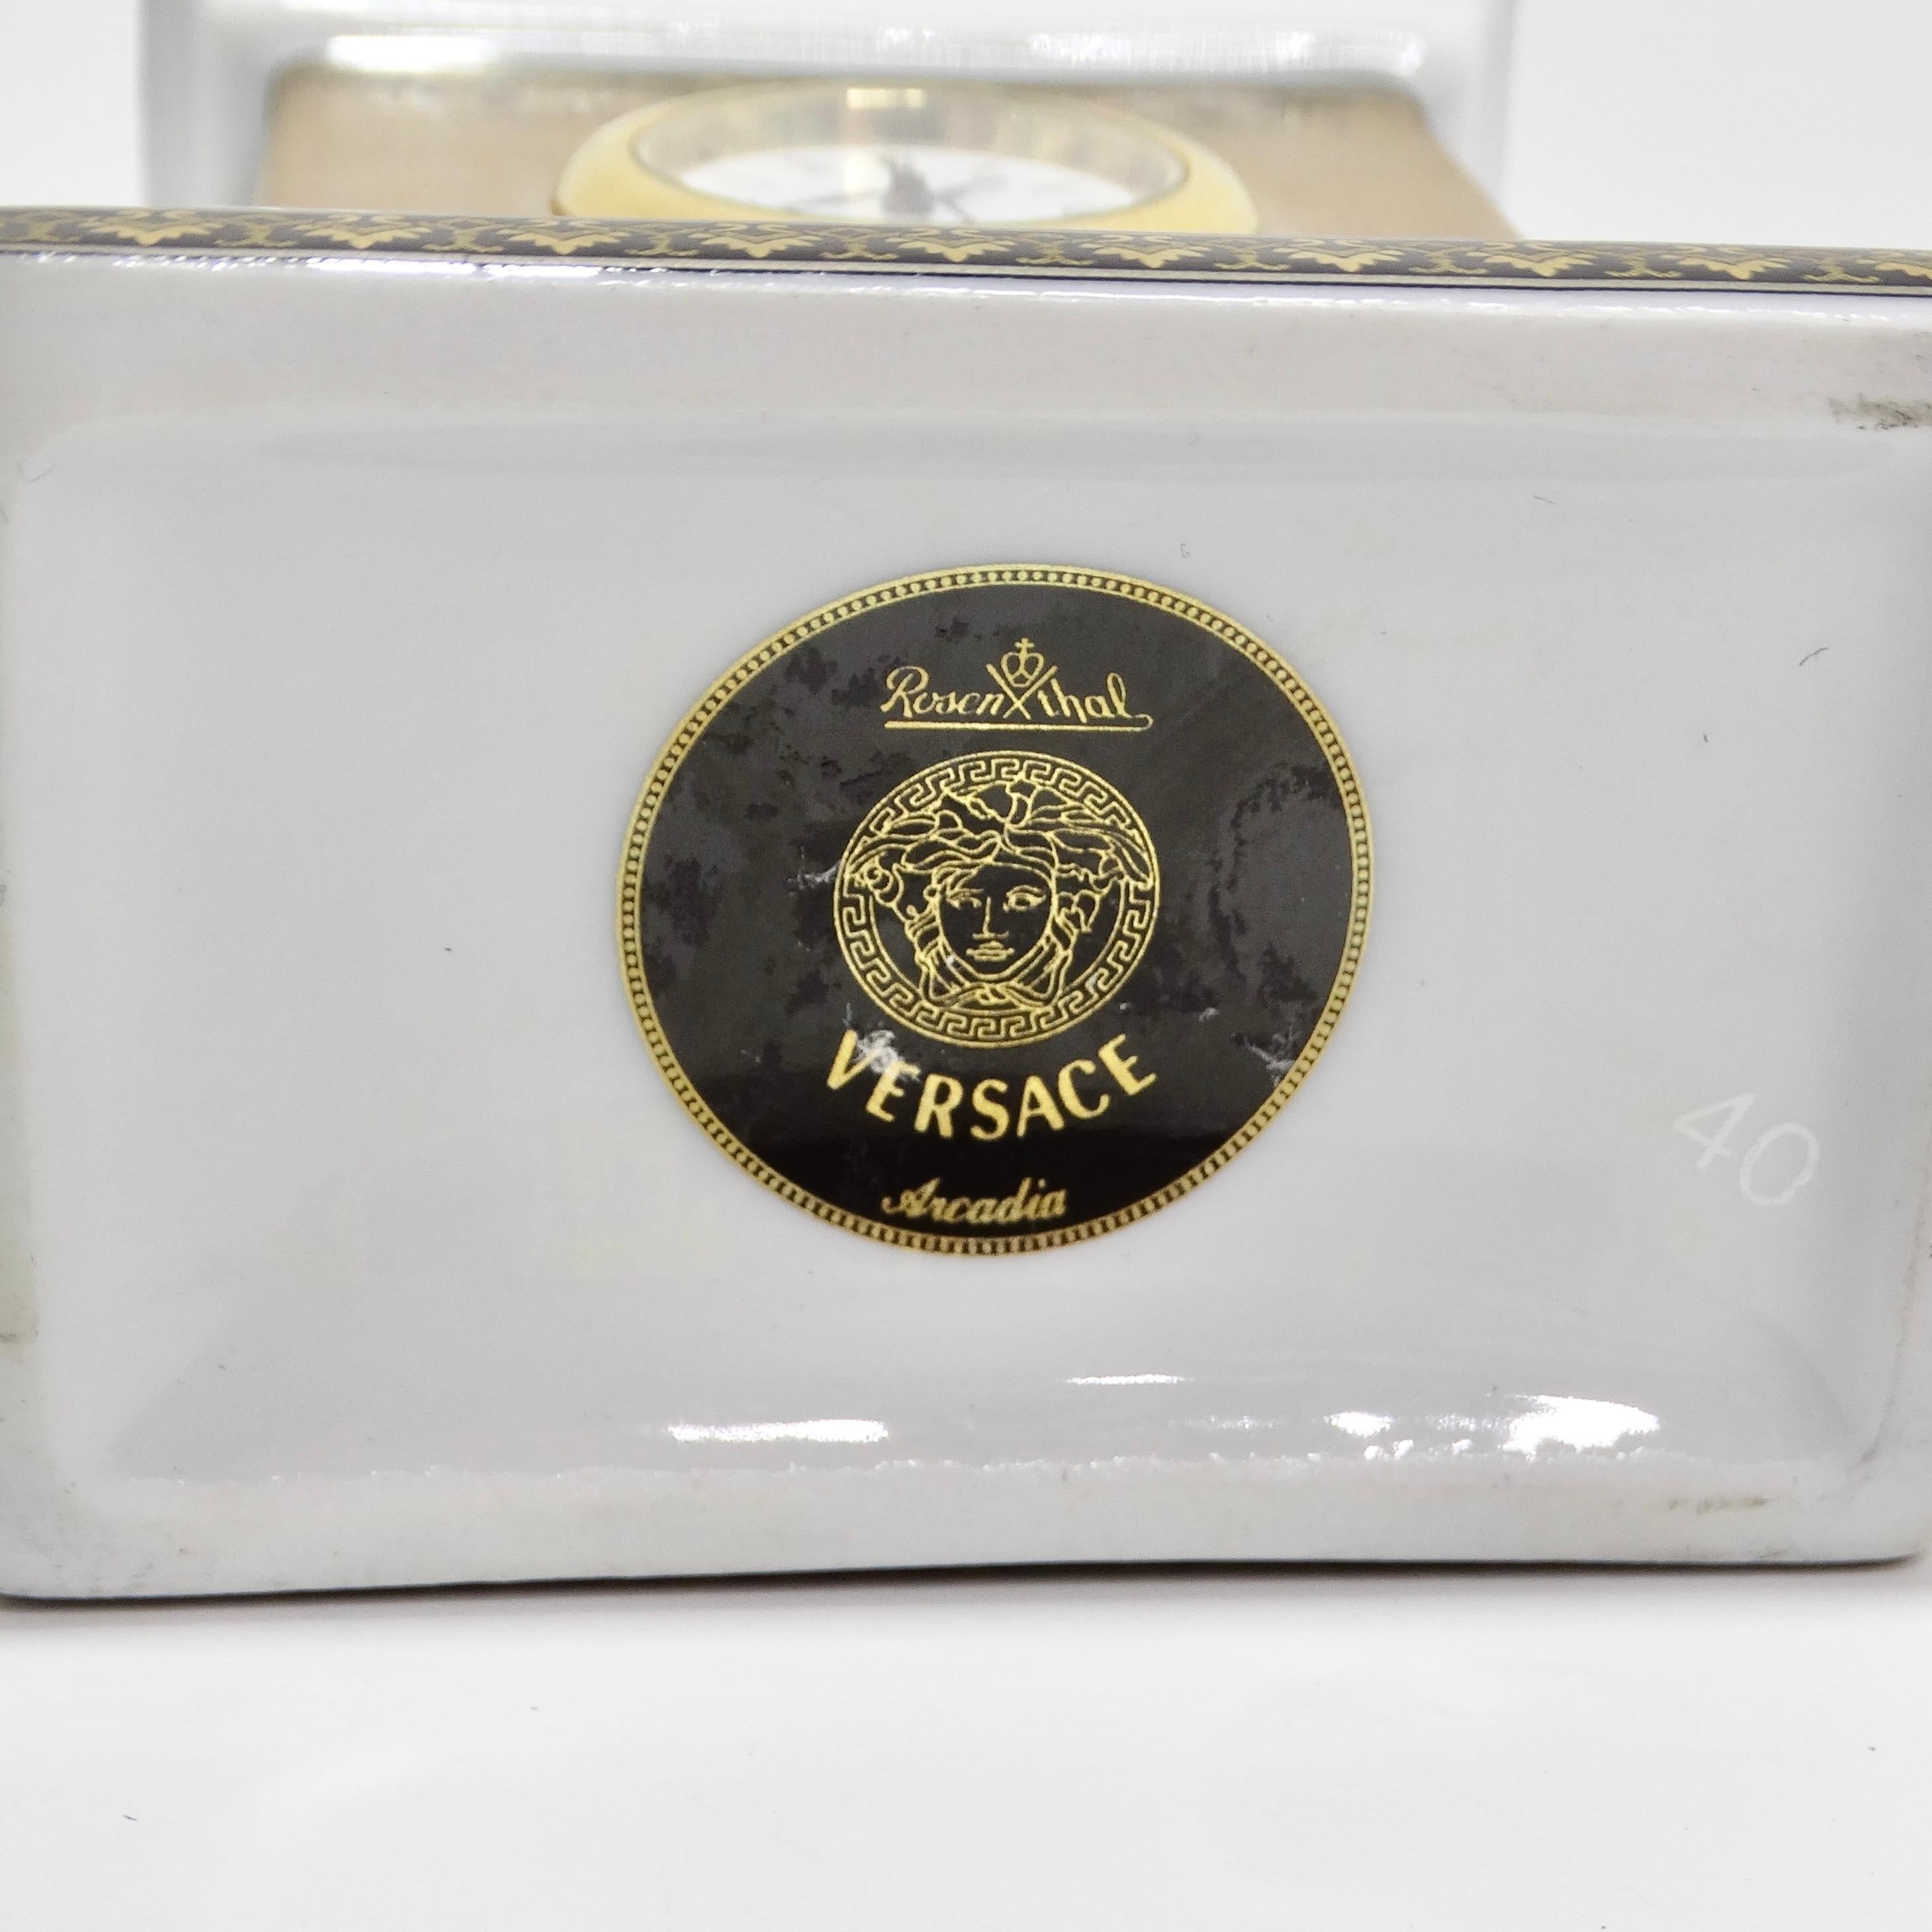 Versace Rosenthal 1990s Porcelain Table Clock For Sale 4